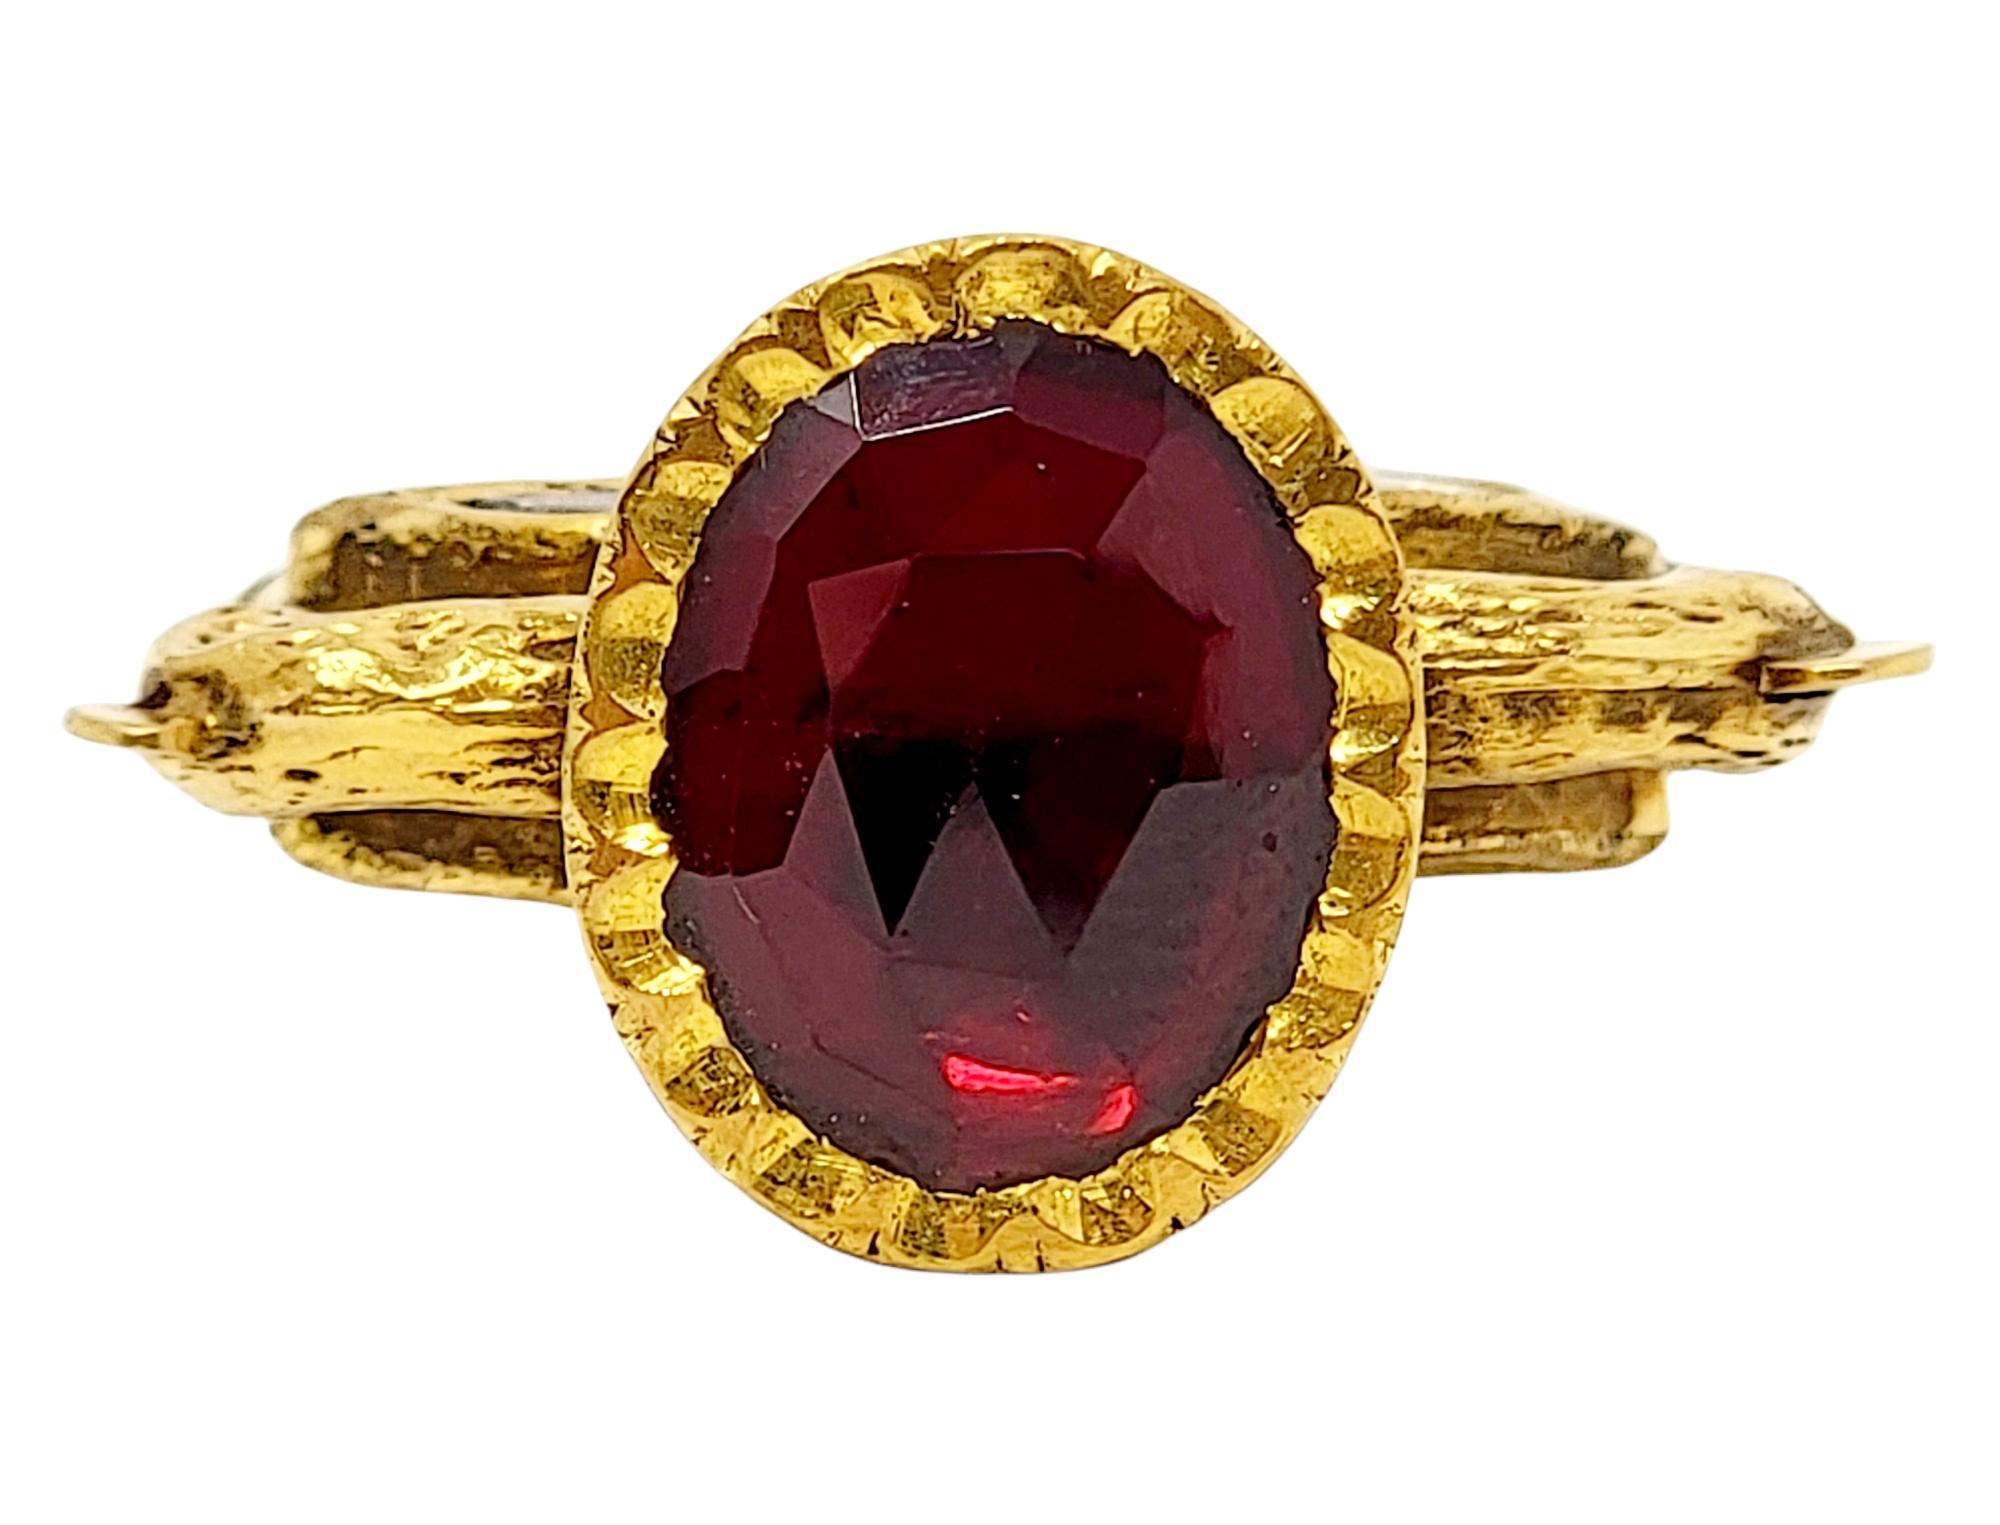 Ring size: 9

Incredible 21K yellow gold, almandine garnet and diamond Polki high profile cocktail ring makes a bold statement. Featuring a colorful gemstone paired with a detailed peacock design, this unique ring is an absolute work of art. The